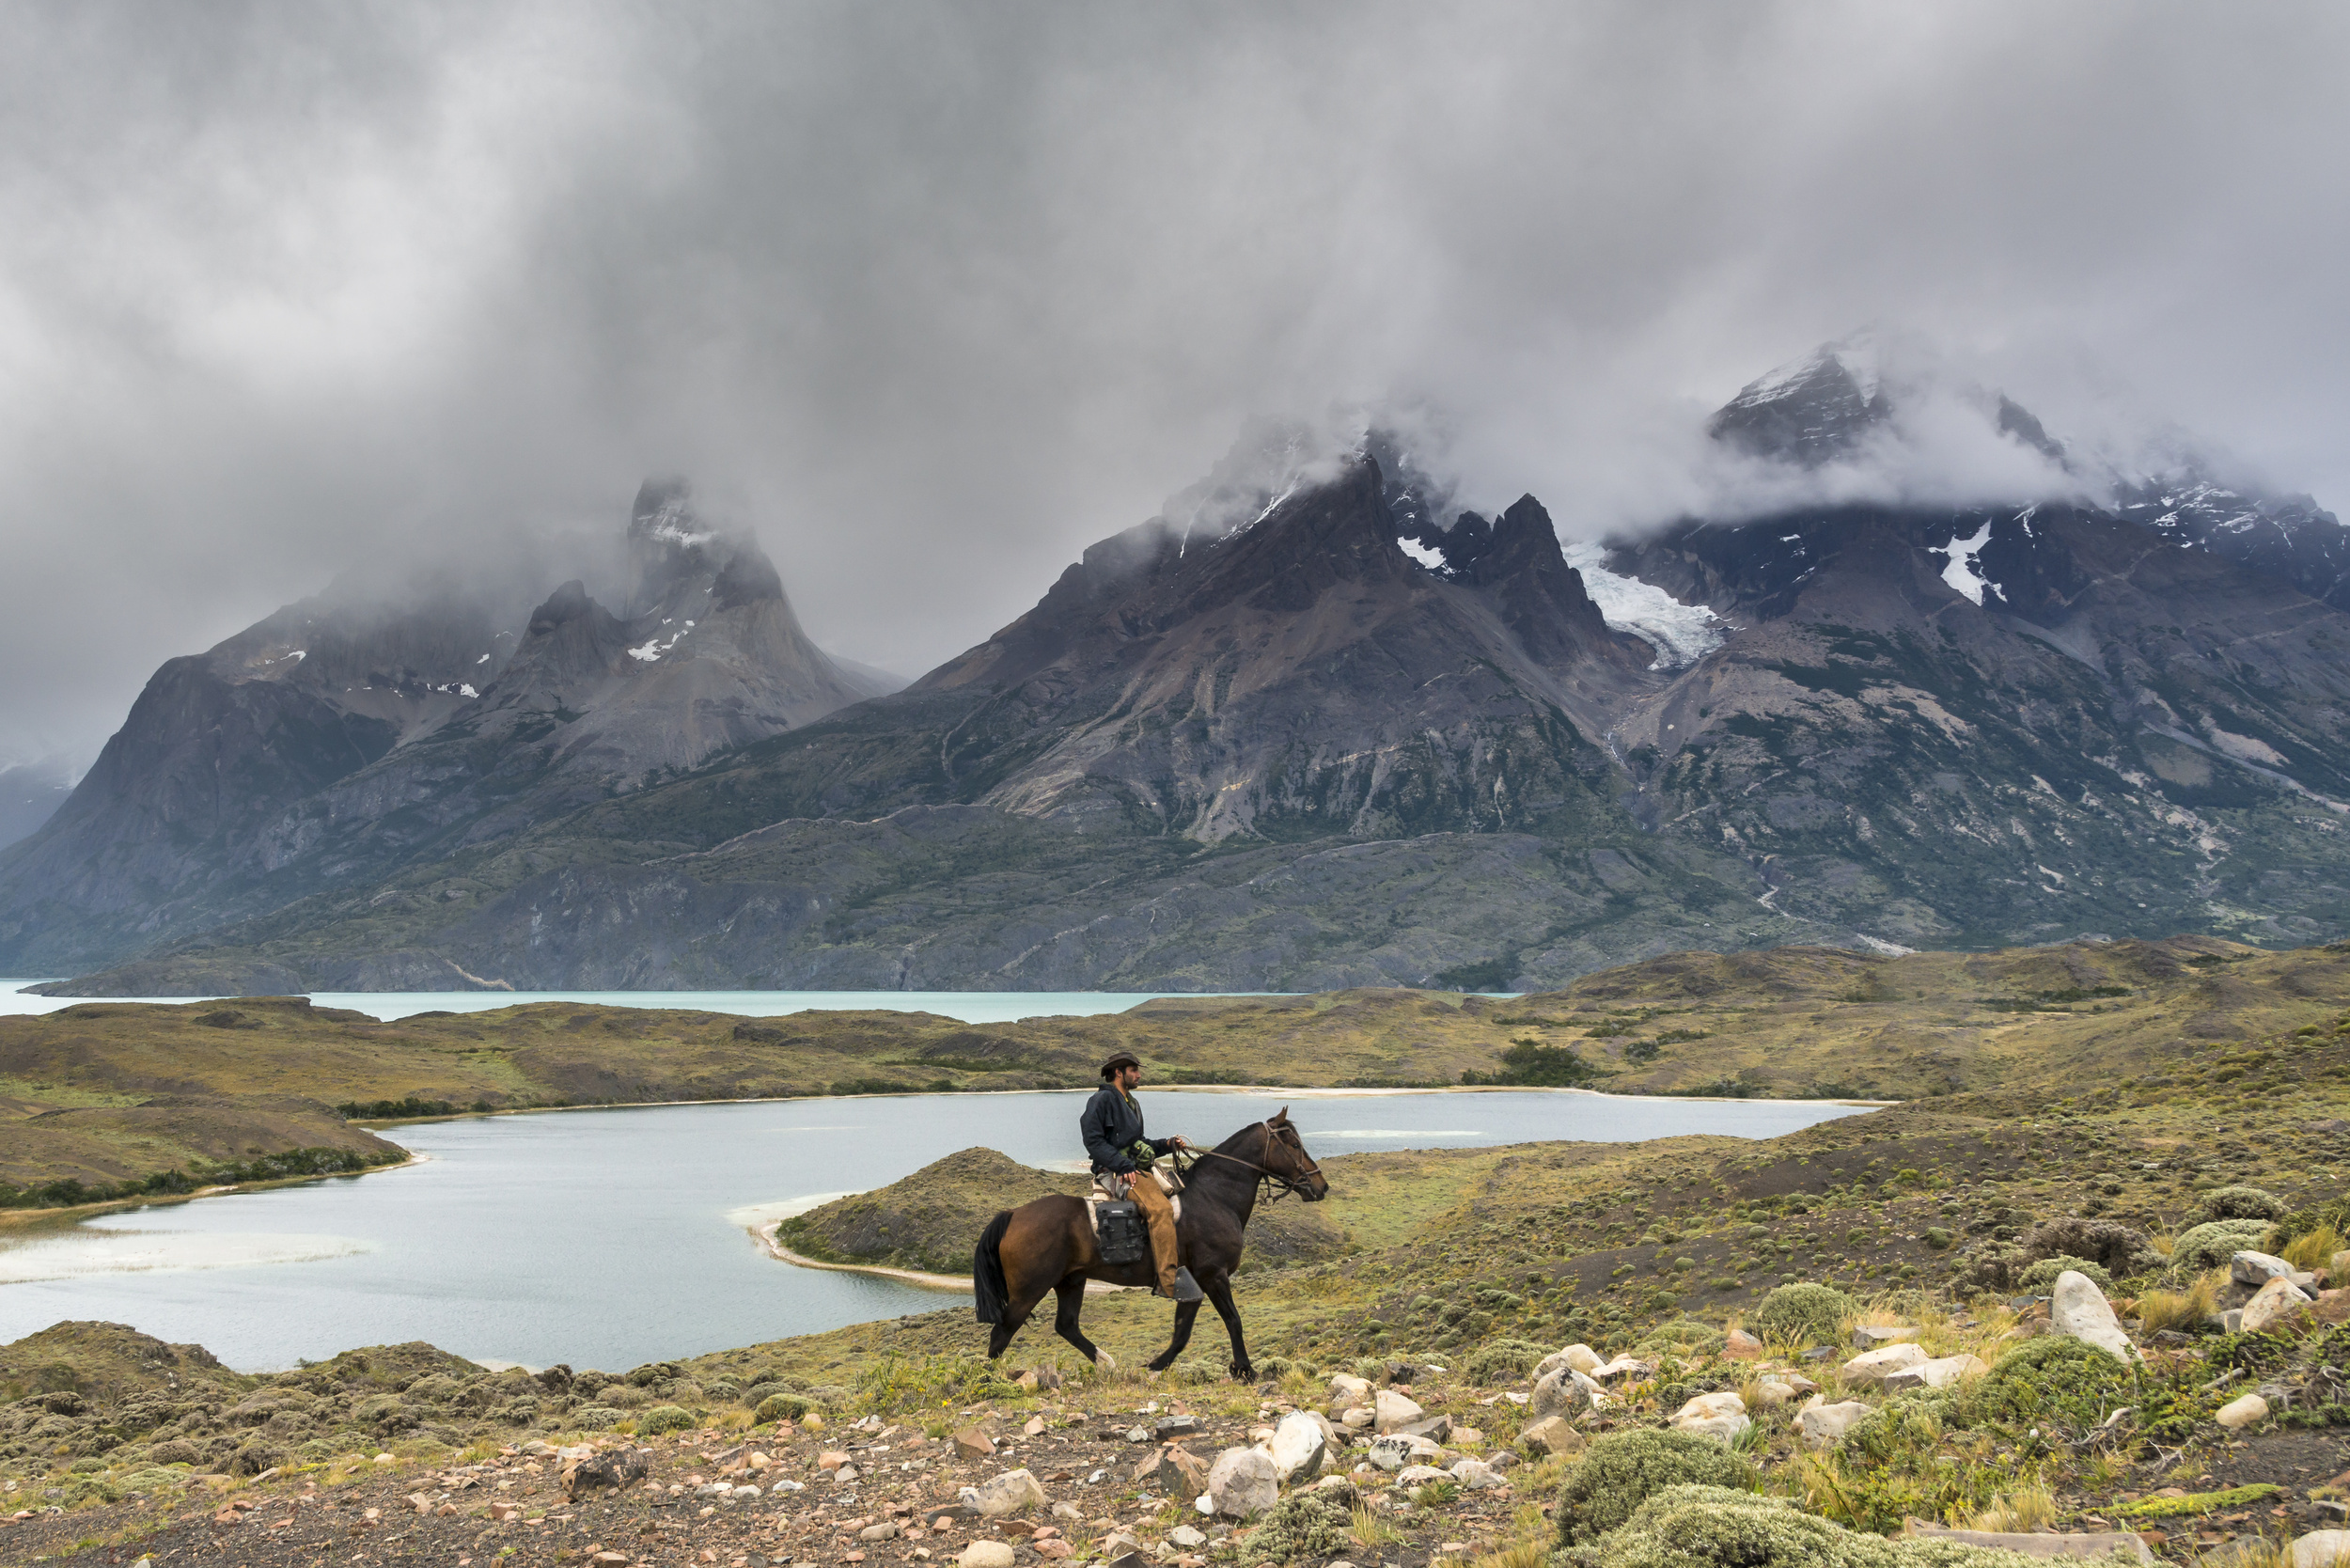 <p>Most travelers to South America’s most famous park explore on their own two feet. But, if you’re keen for a bit of a break or just a different vantage point, try a ride through the mountains. You can organize a day ride or an overnight trek with many Patagonian tour companies.</p><p>You may also like: <a href='https://www.yardbarker.com/lifestyle/articles/18_things_you_think_are_normal_but_are_actually_uniquely_american/s1__39111167'>18 things you think are normal but are actually uniquely American</a></p>